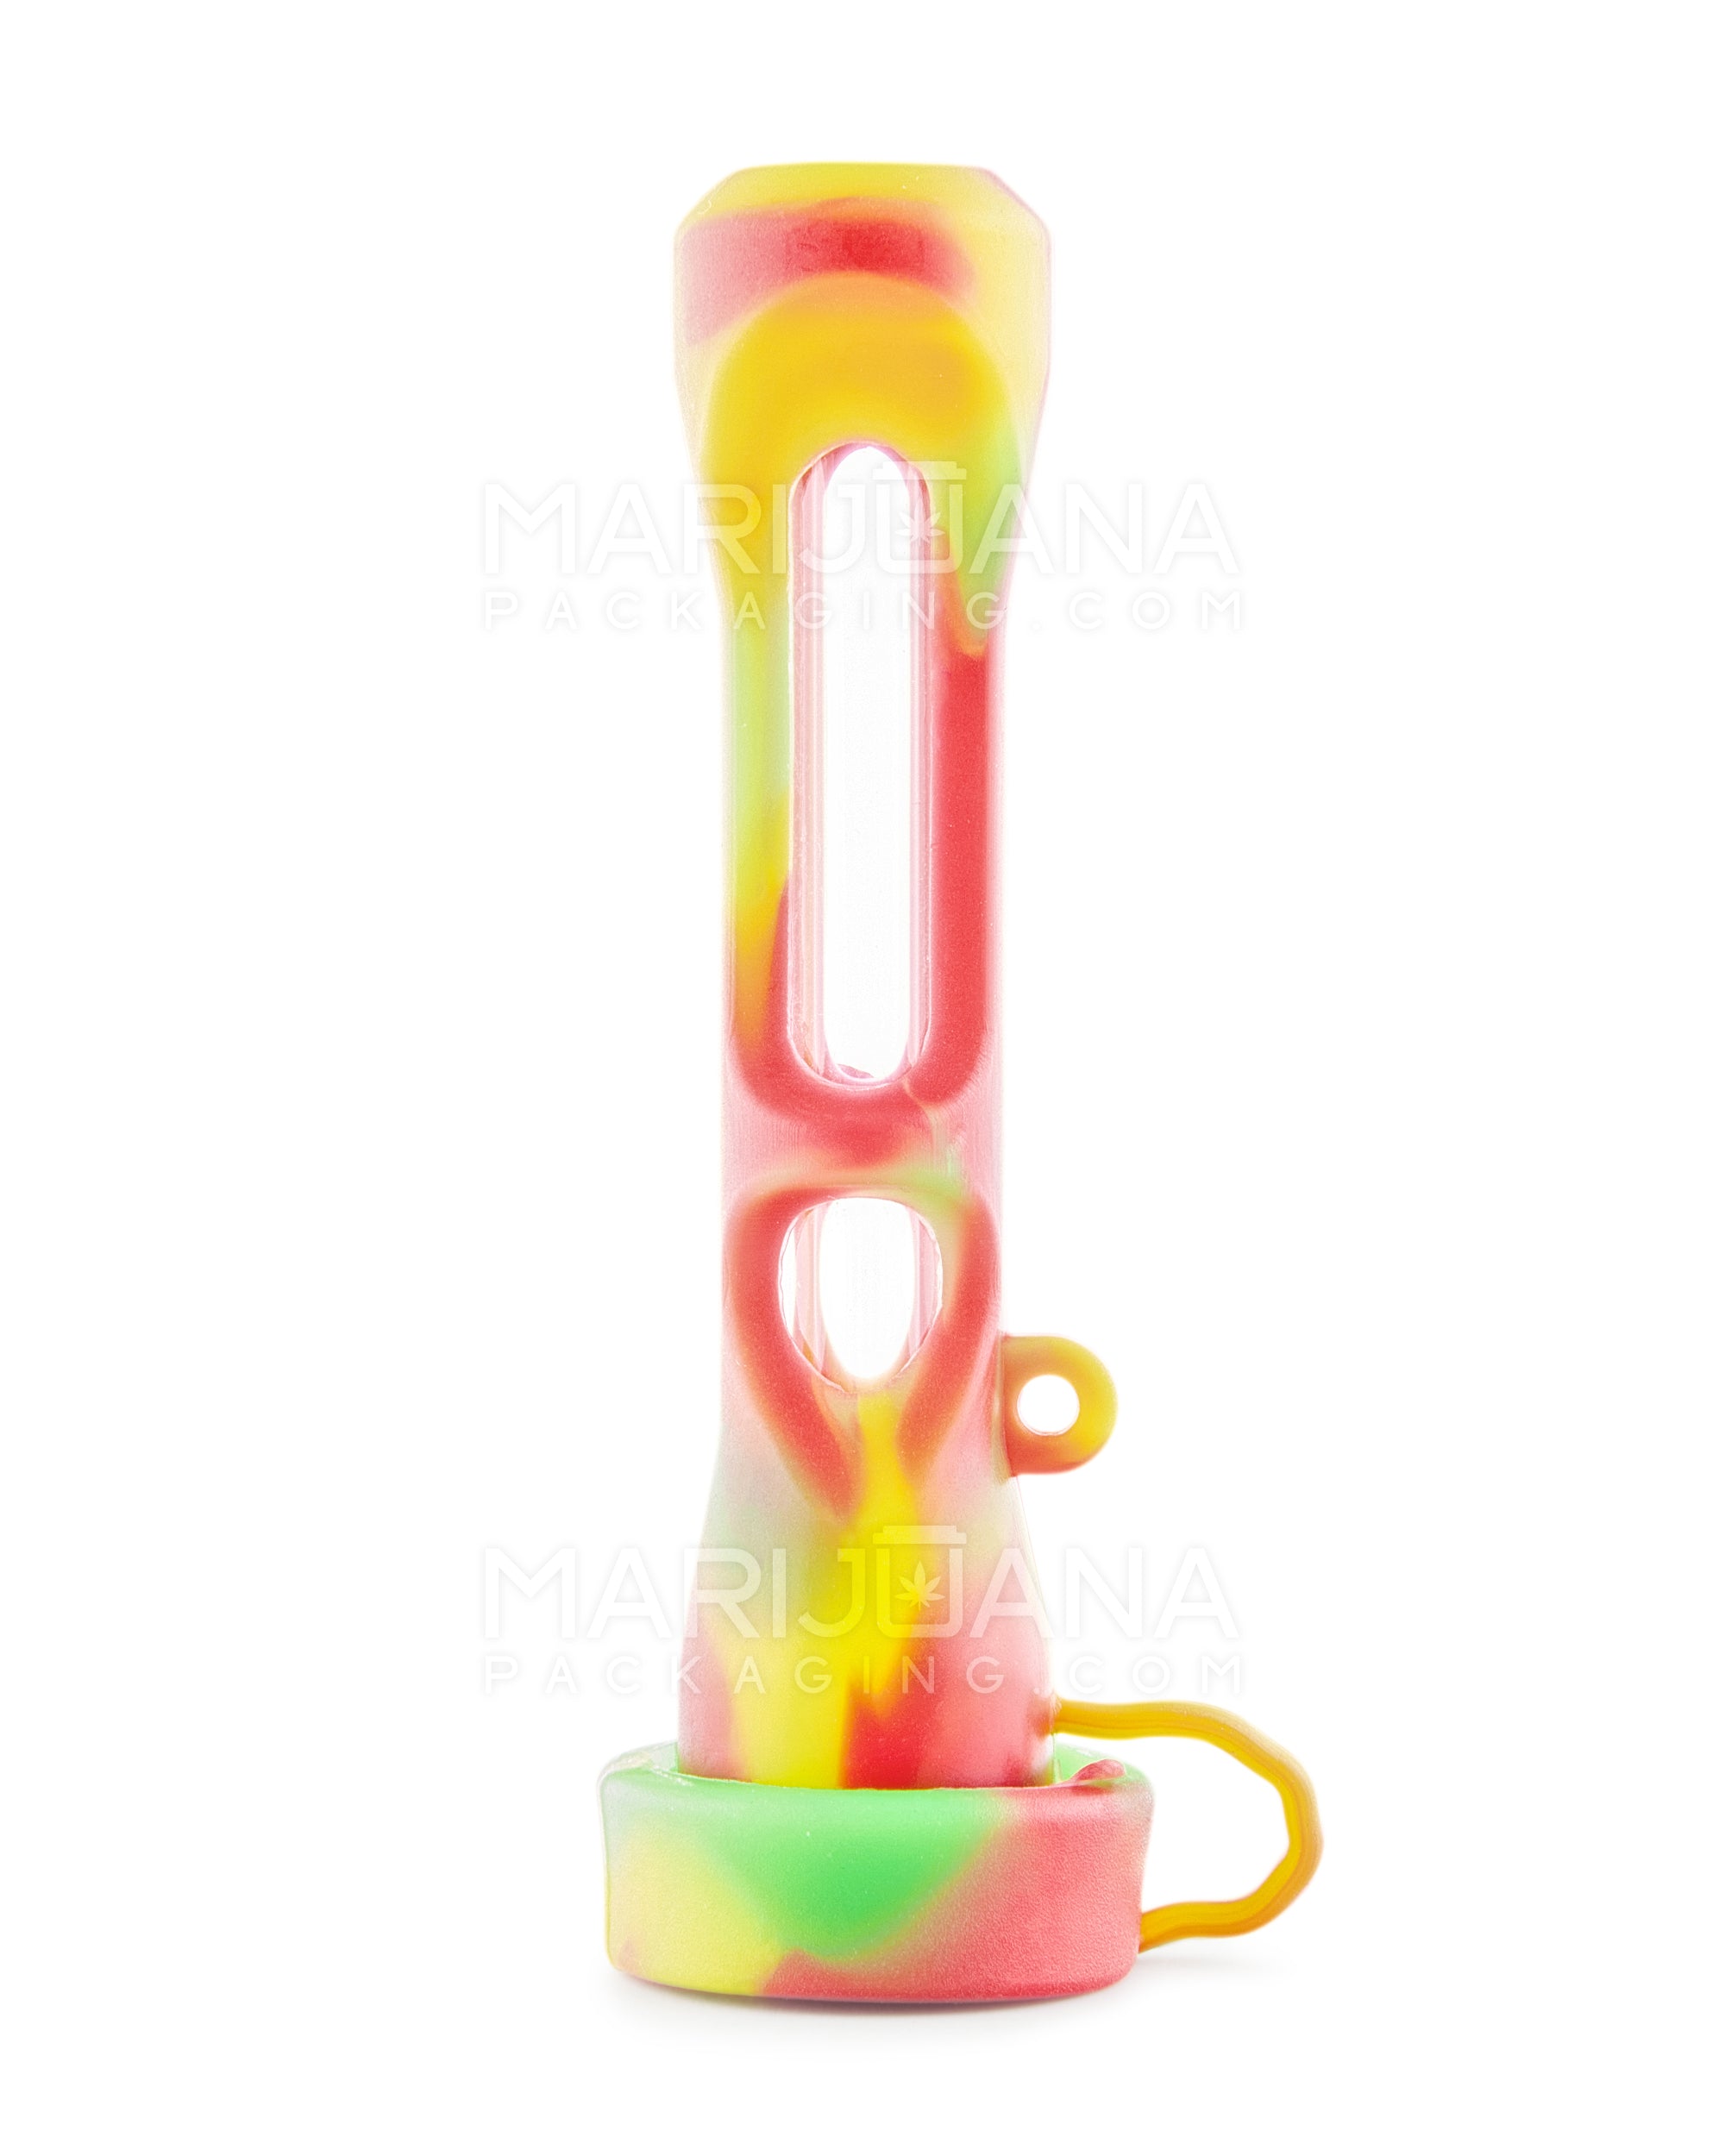 Silicone Cover Glass Chillum Hand Pipe w/ Closing Cap | 3.5in Long - Silicone/Glass - Assorted